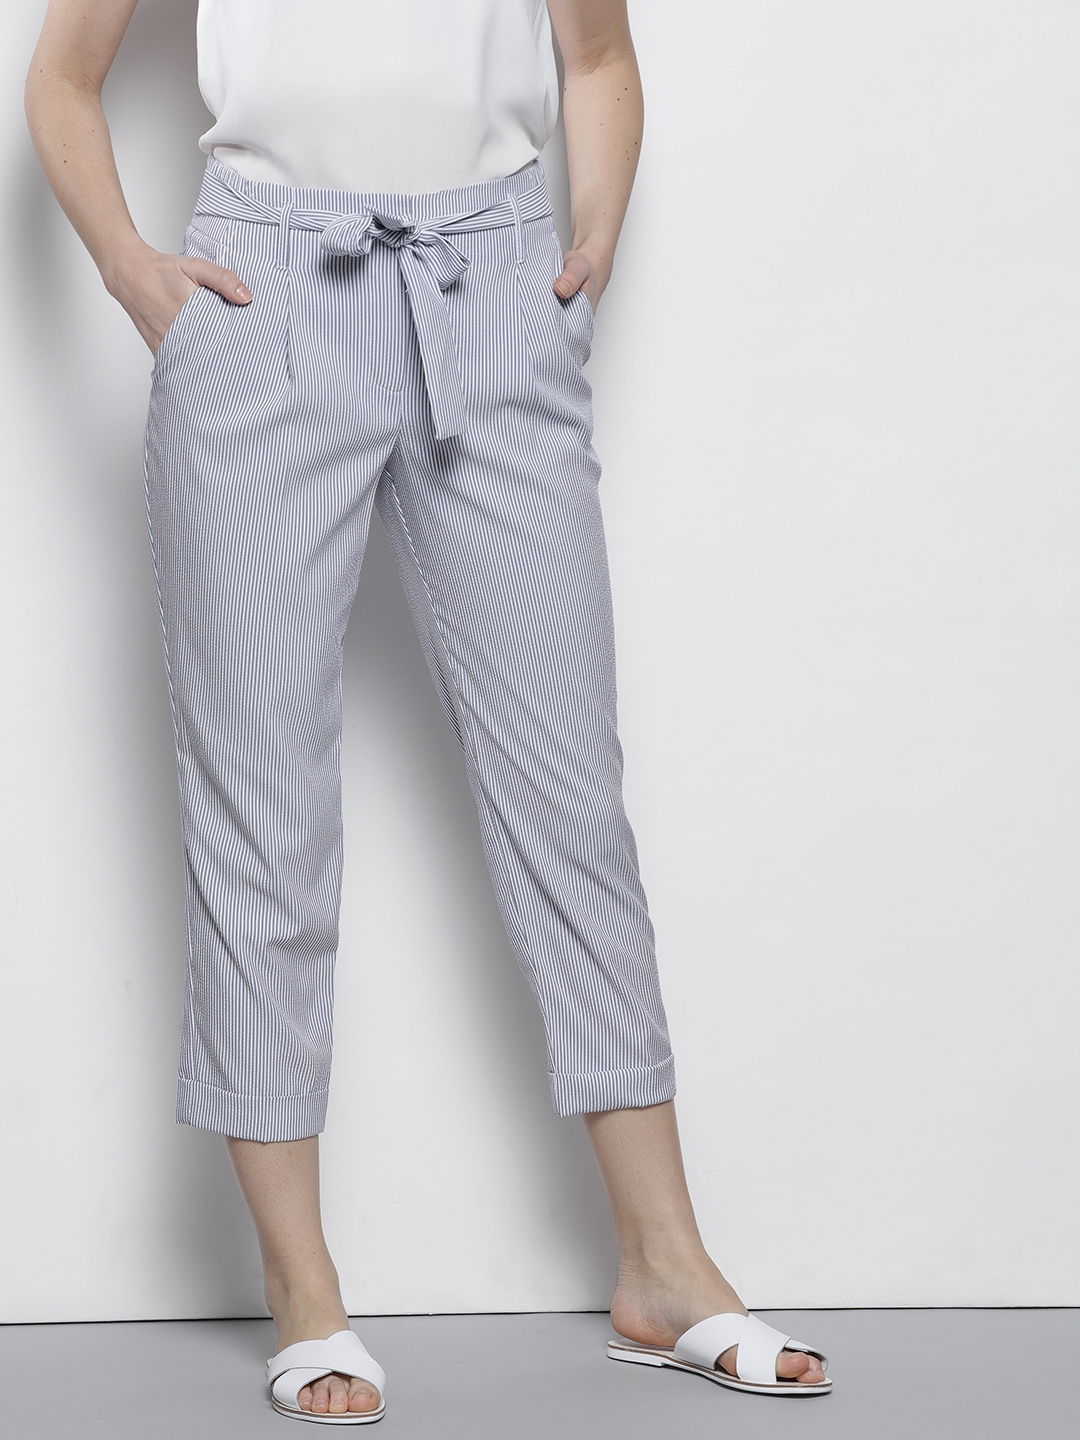 Buy Gray White Stripe Regular Fit Solid Trouser Cotton for Best Price  Reviews Free Shipping